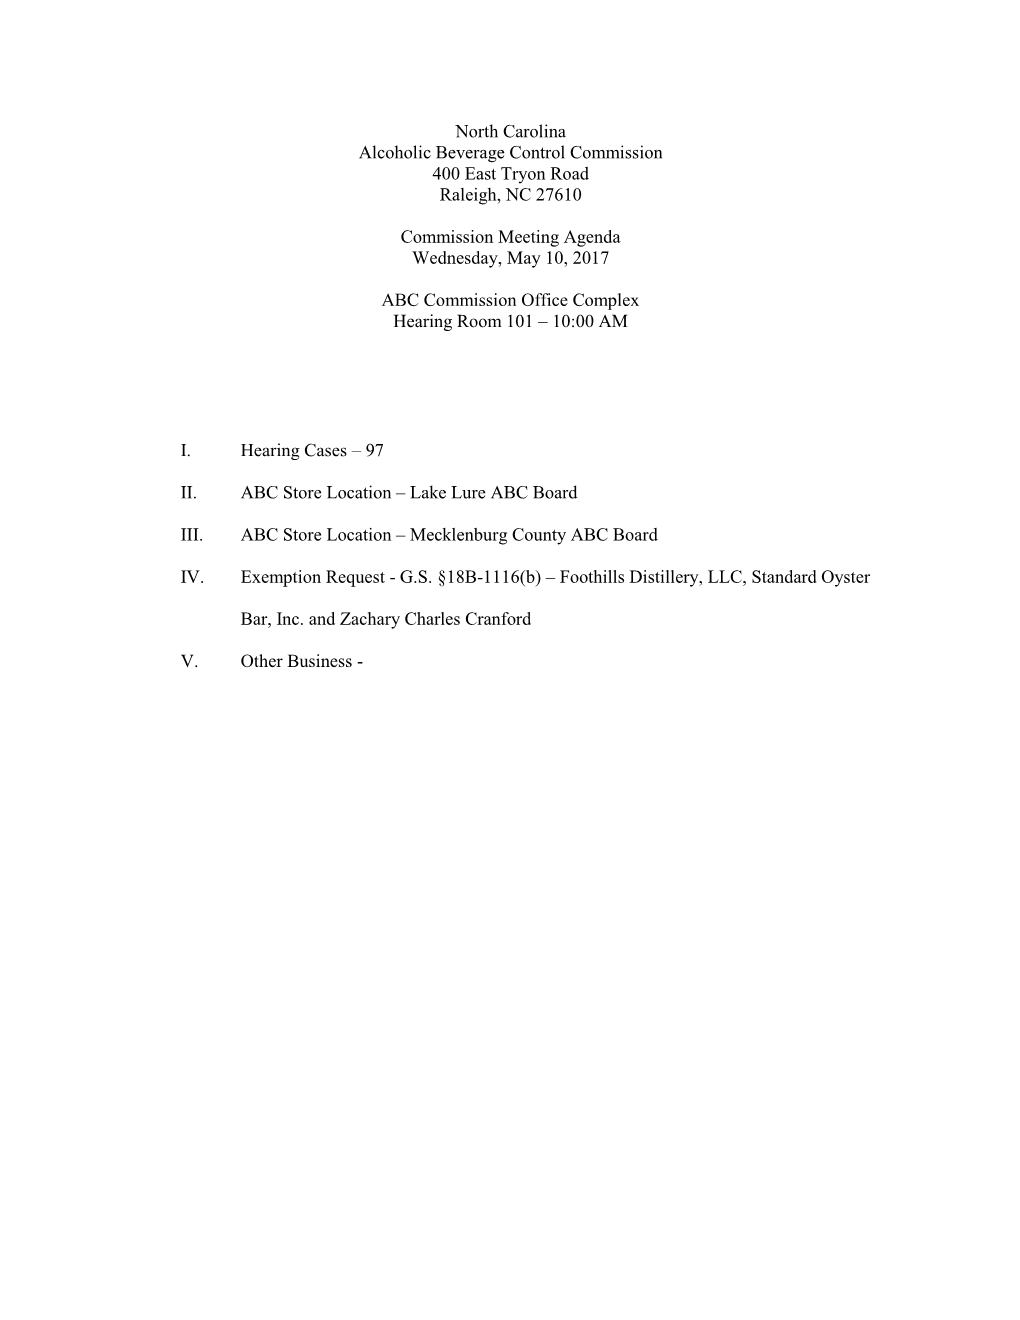 North Carolina Alcoholic Beverage Control Commission 400 East Tryon Road Raleigh, NC 27610 Commission Meeting Agenda Wednesday